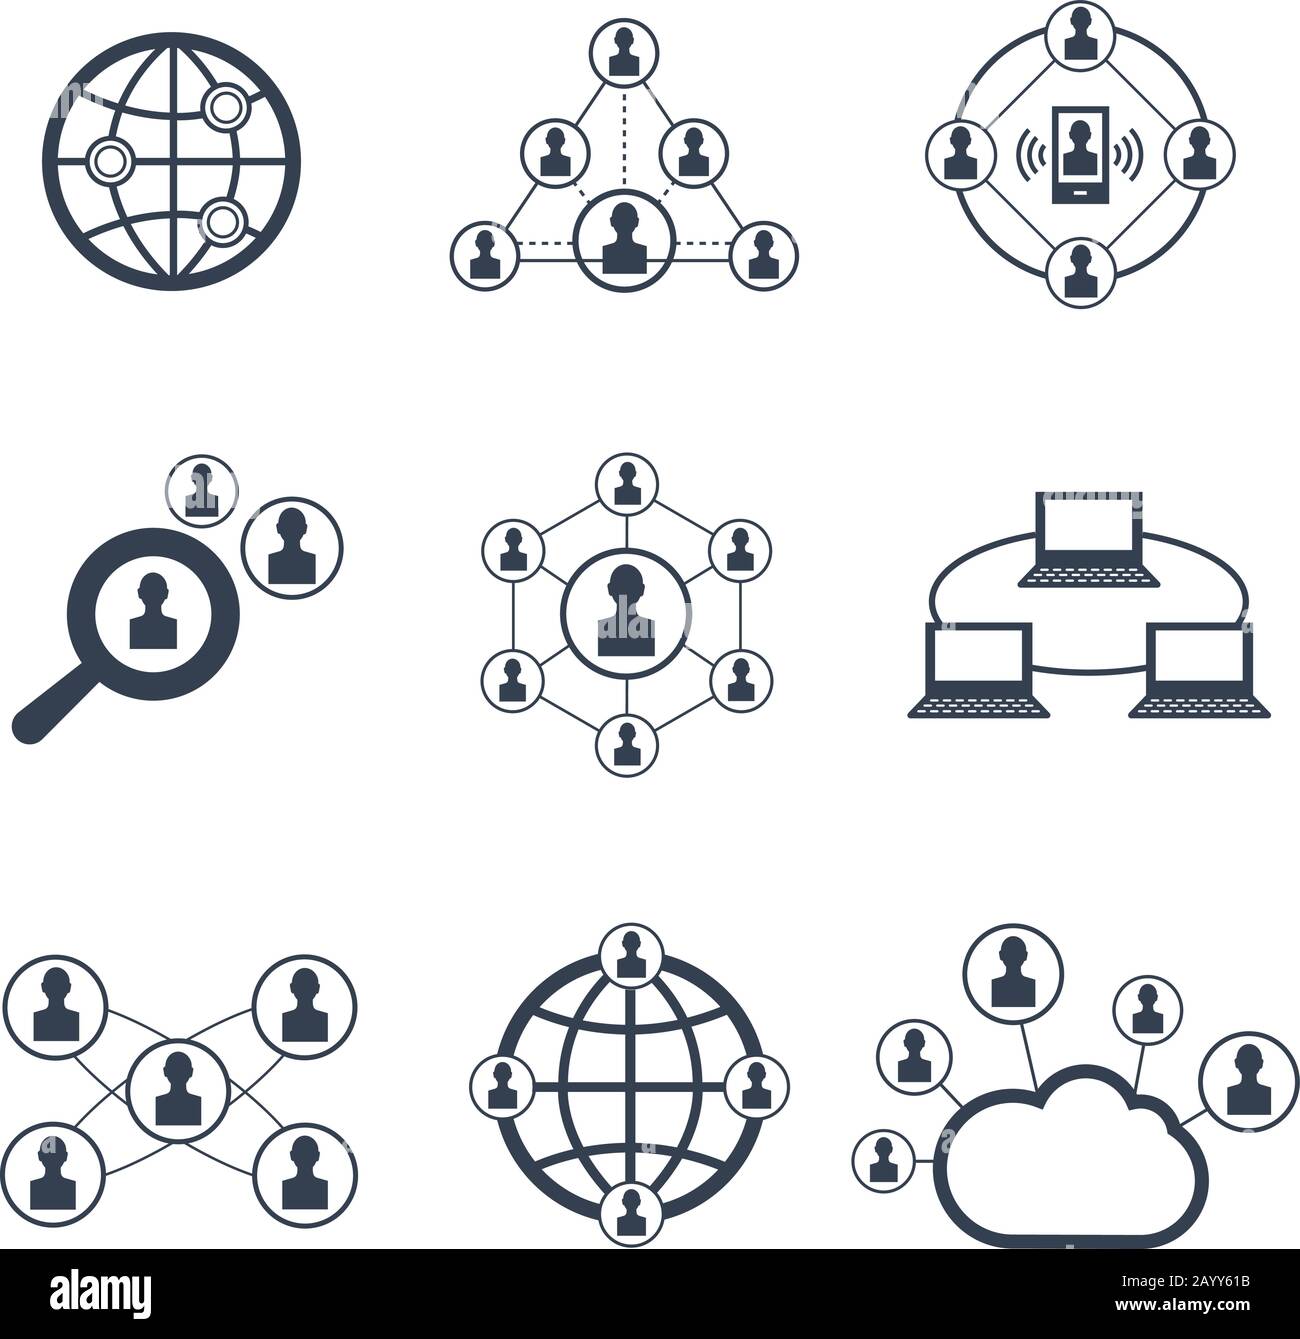 Social network symbols. Vector icons of connection people to network and internet social people communication signs Stock Vector